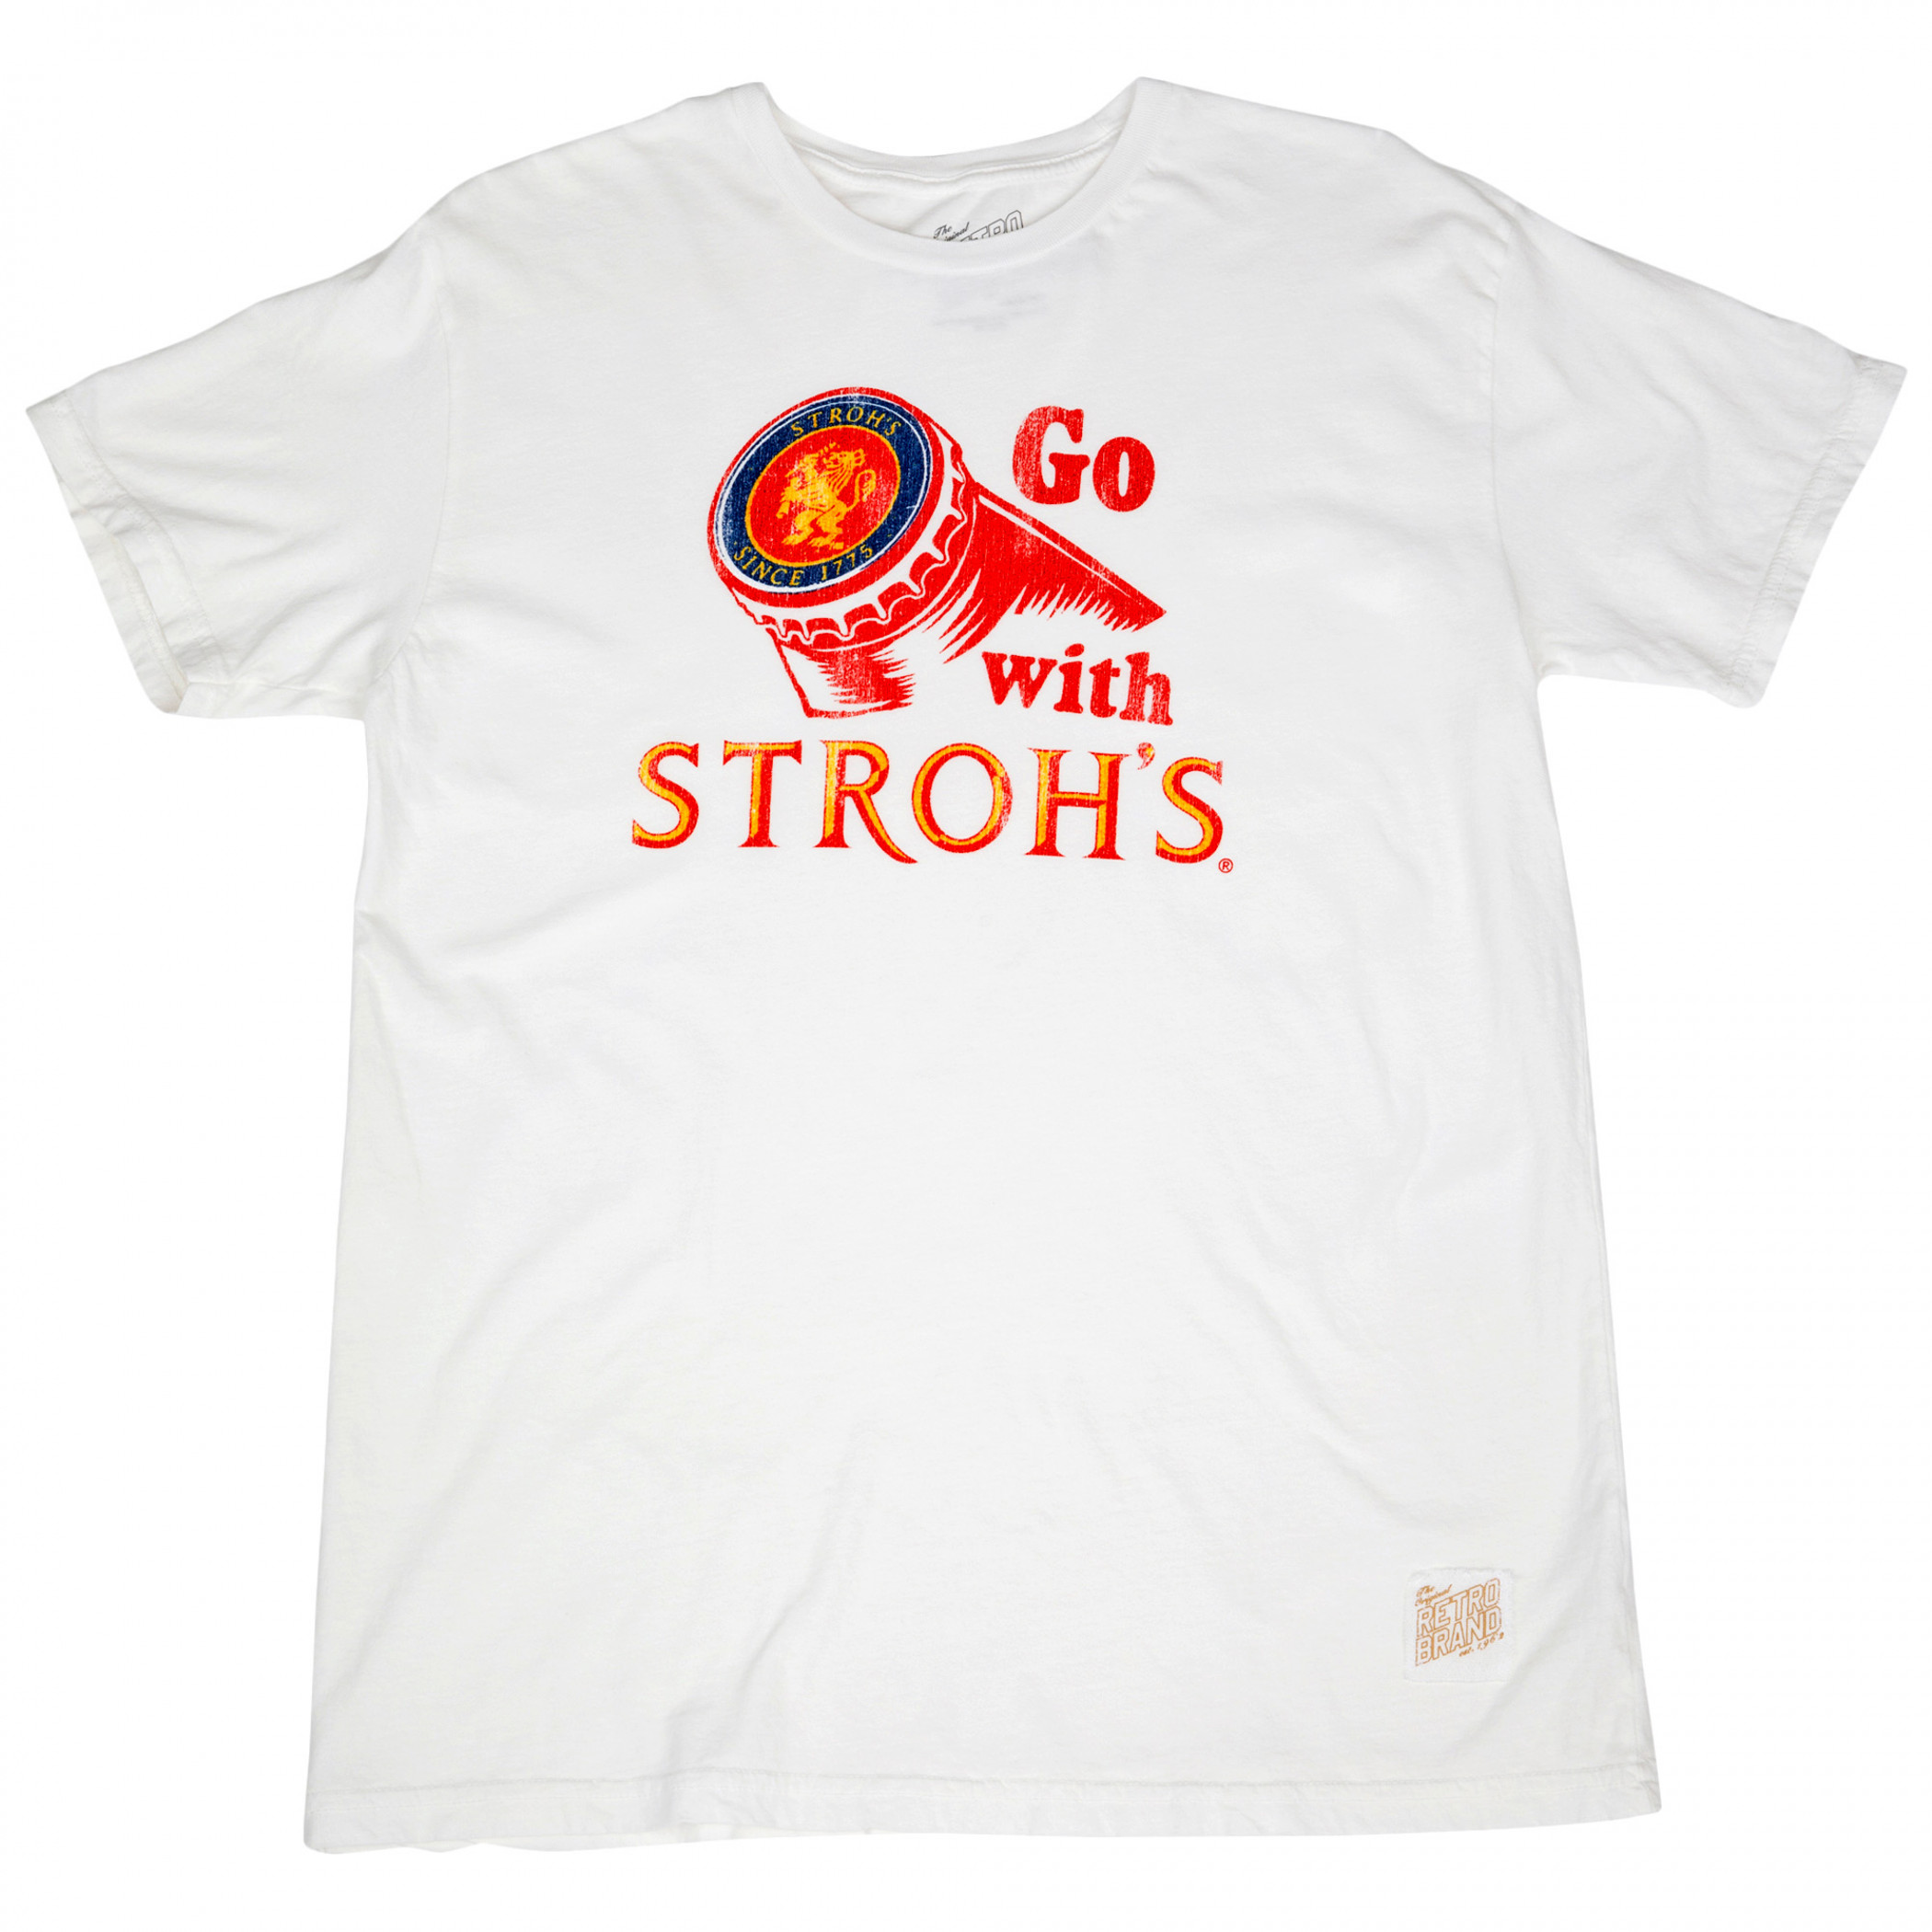 Stroh's Beer Go with Stroh's Vintage Style T-Shirt